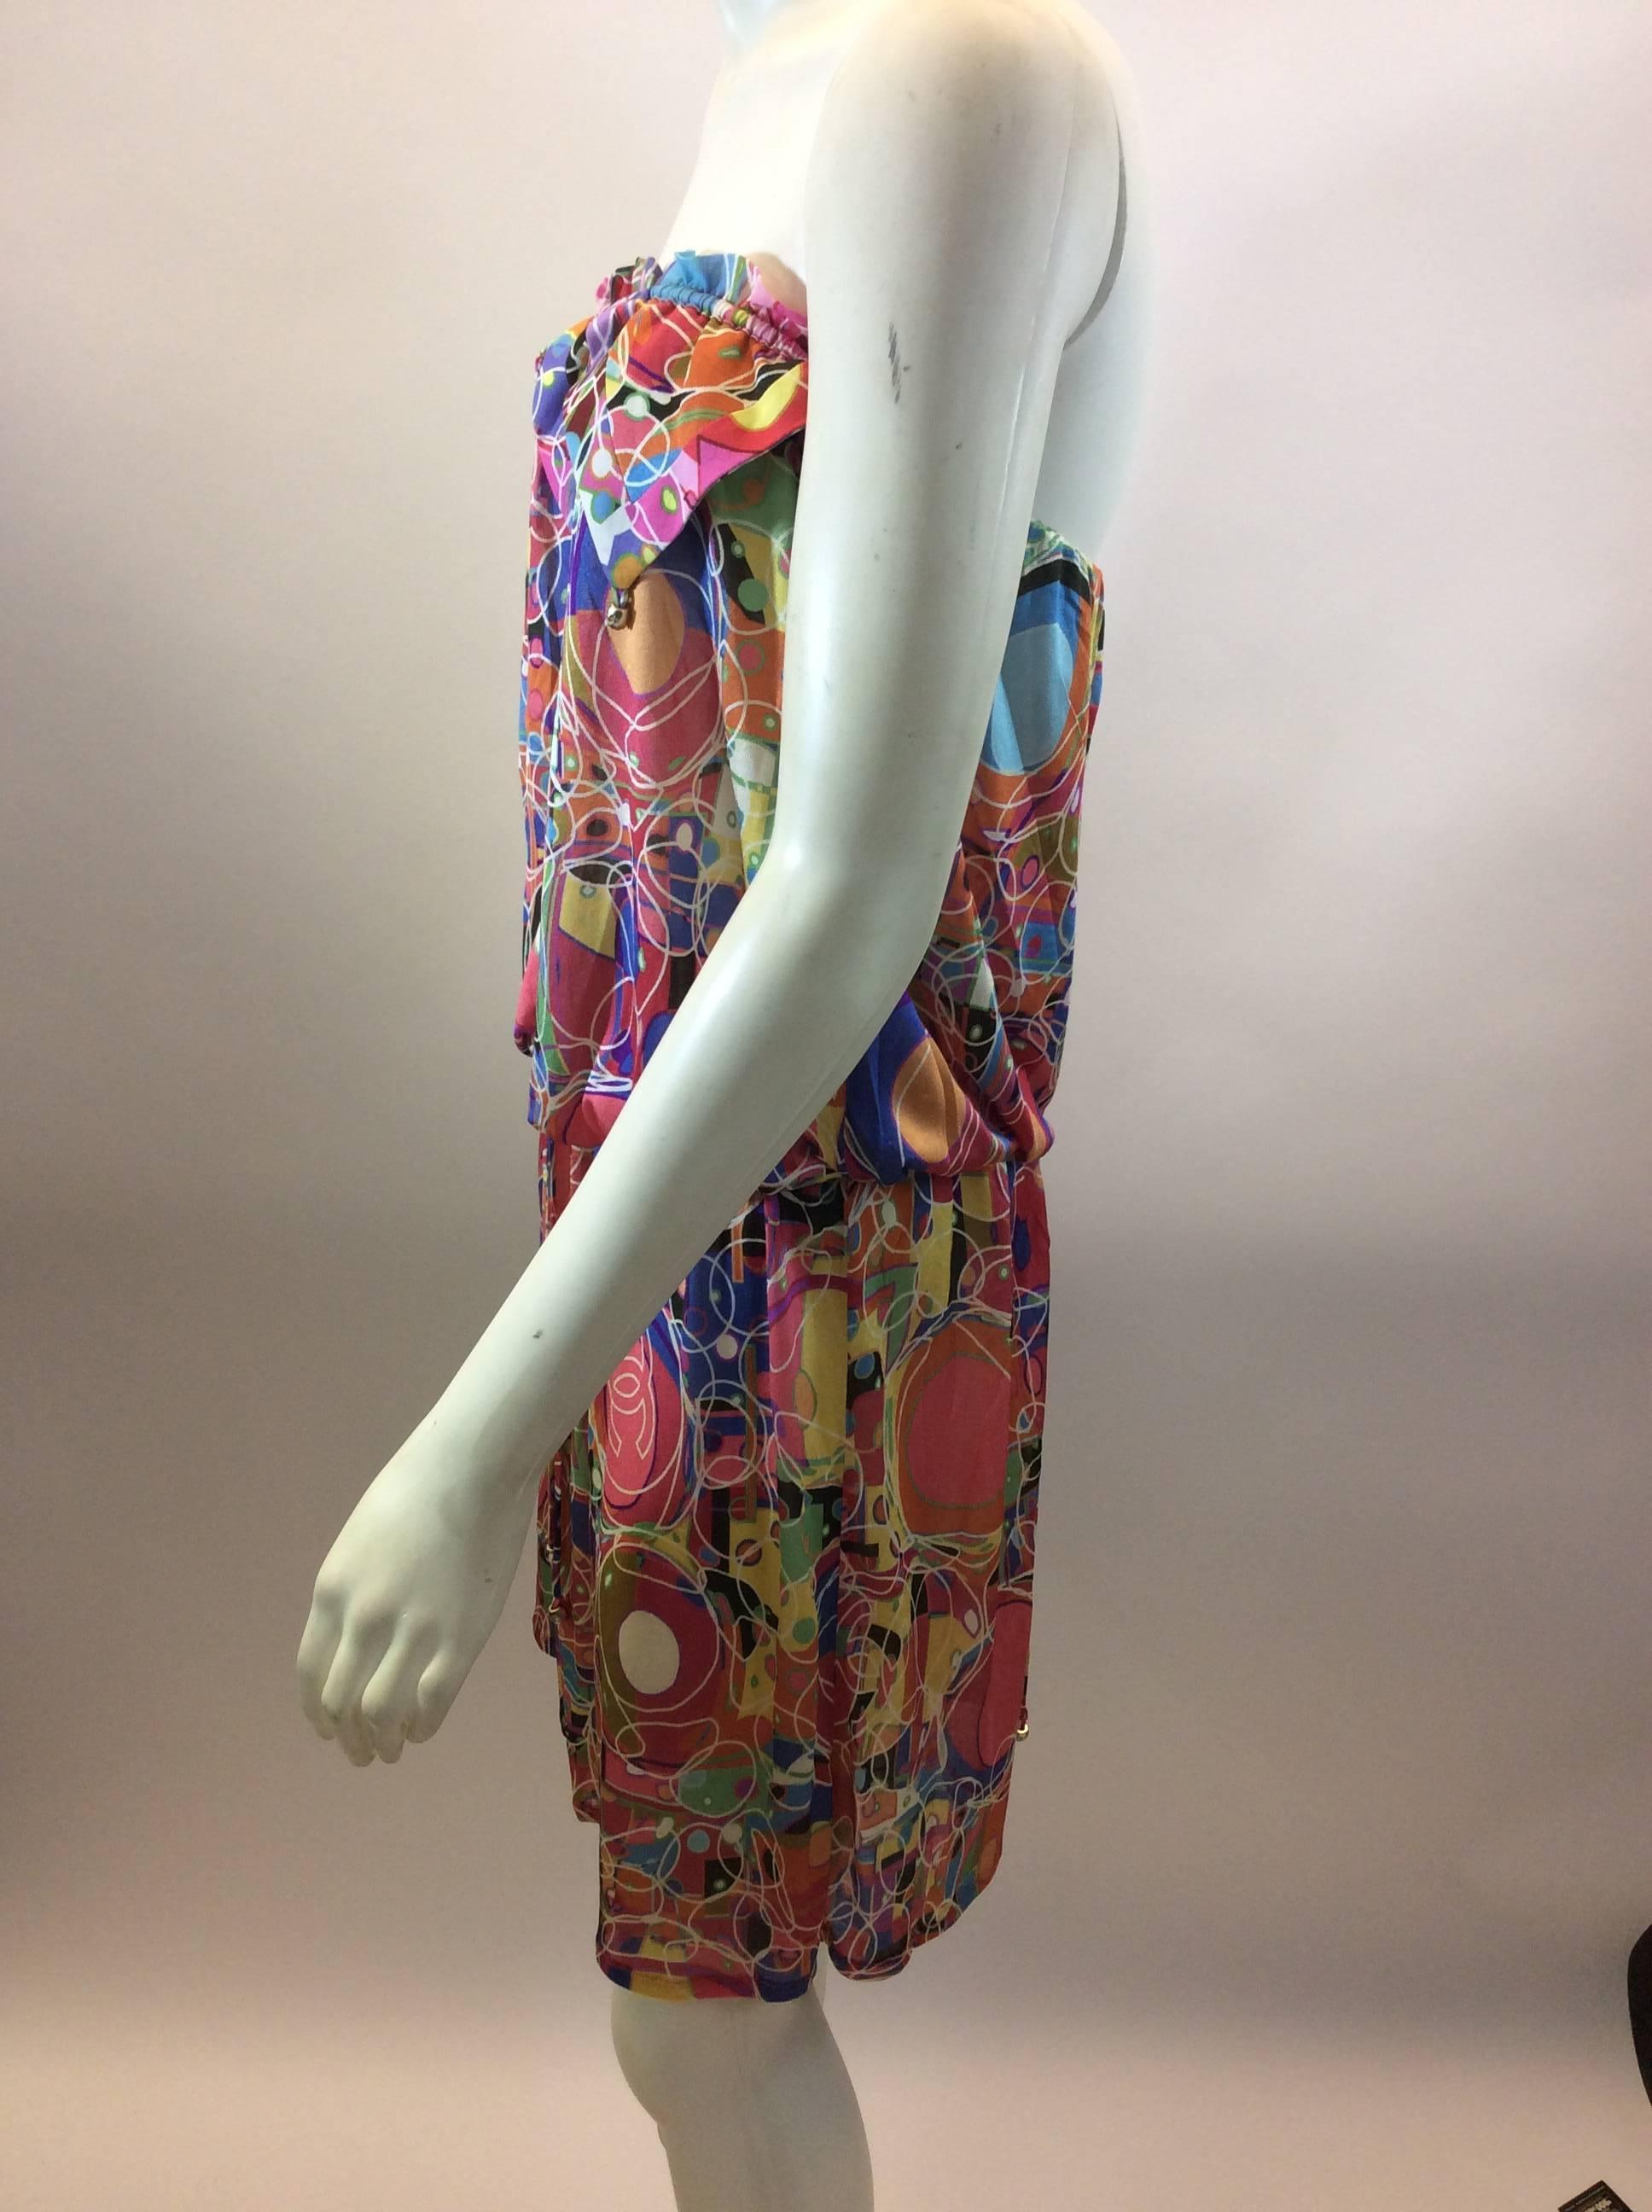 Chanel Print Silk Strapless Dress
$450
100% Silk
Inset- 100% Cotton
Made in France
Size 40
Length 36